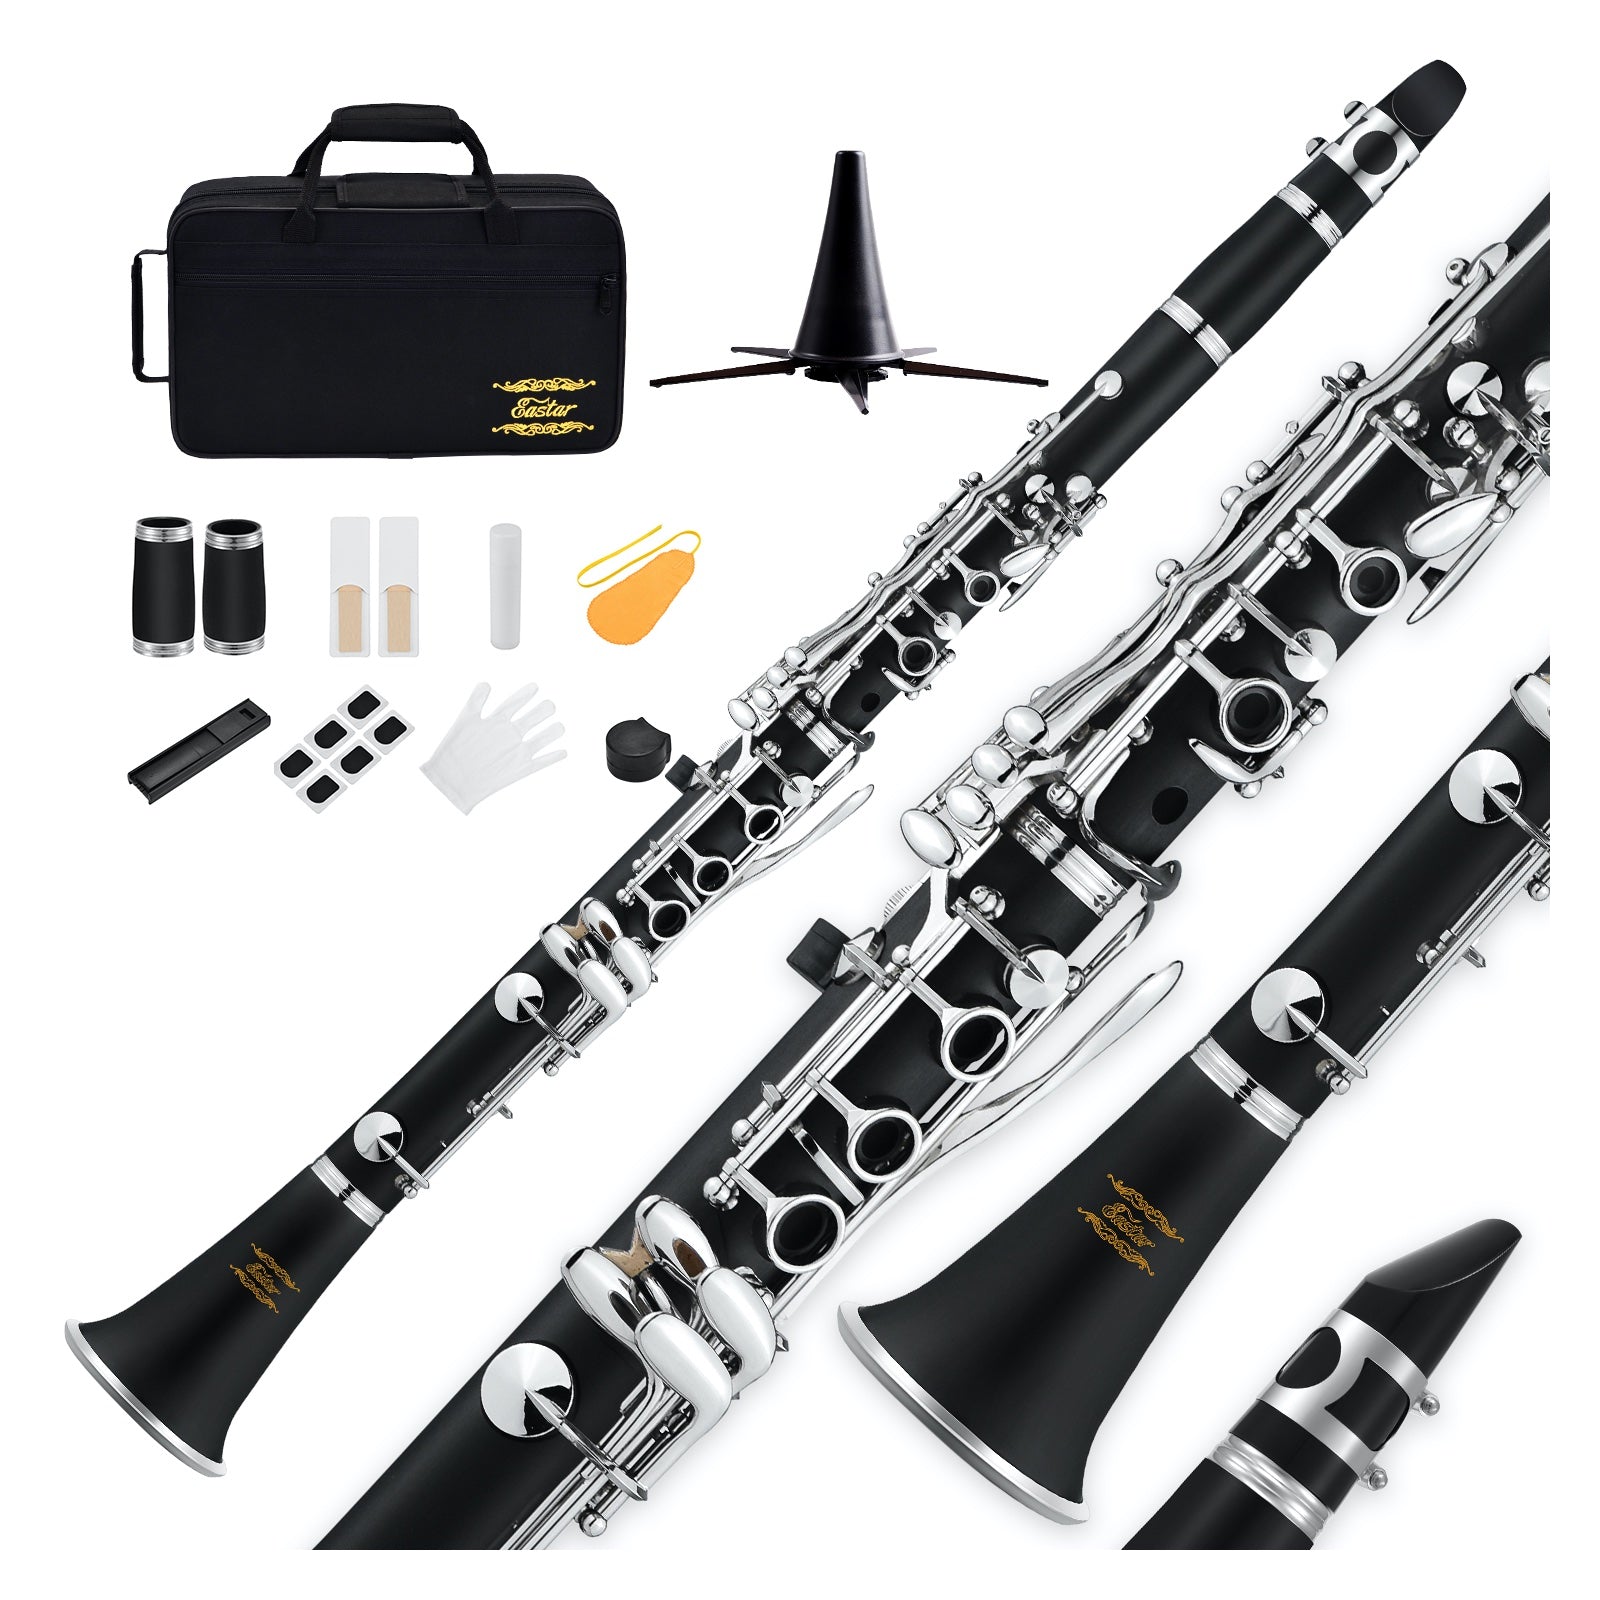 

Eastar ECL-300 B-Flat Clarinet for Beginners/Students with 4C Mouthpiece/3-Pack Practice Reeds 2.5"/Nylon Hard Case/Cleaning Kit/Black